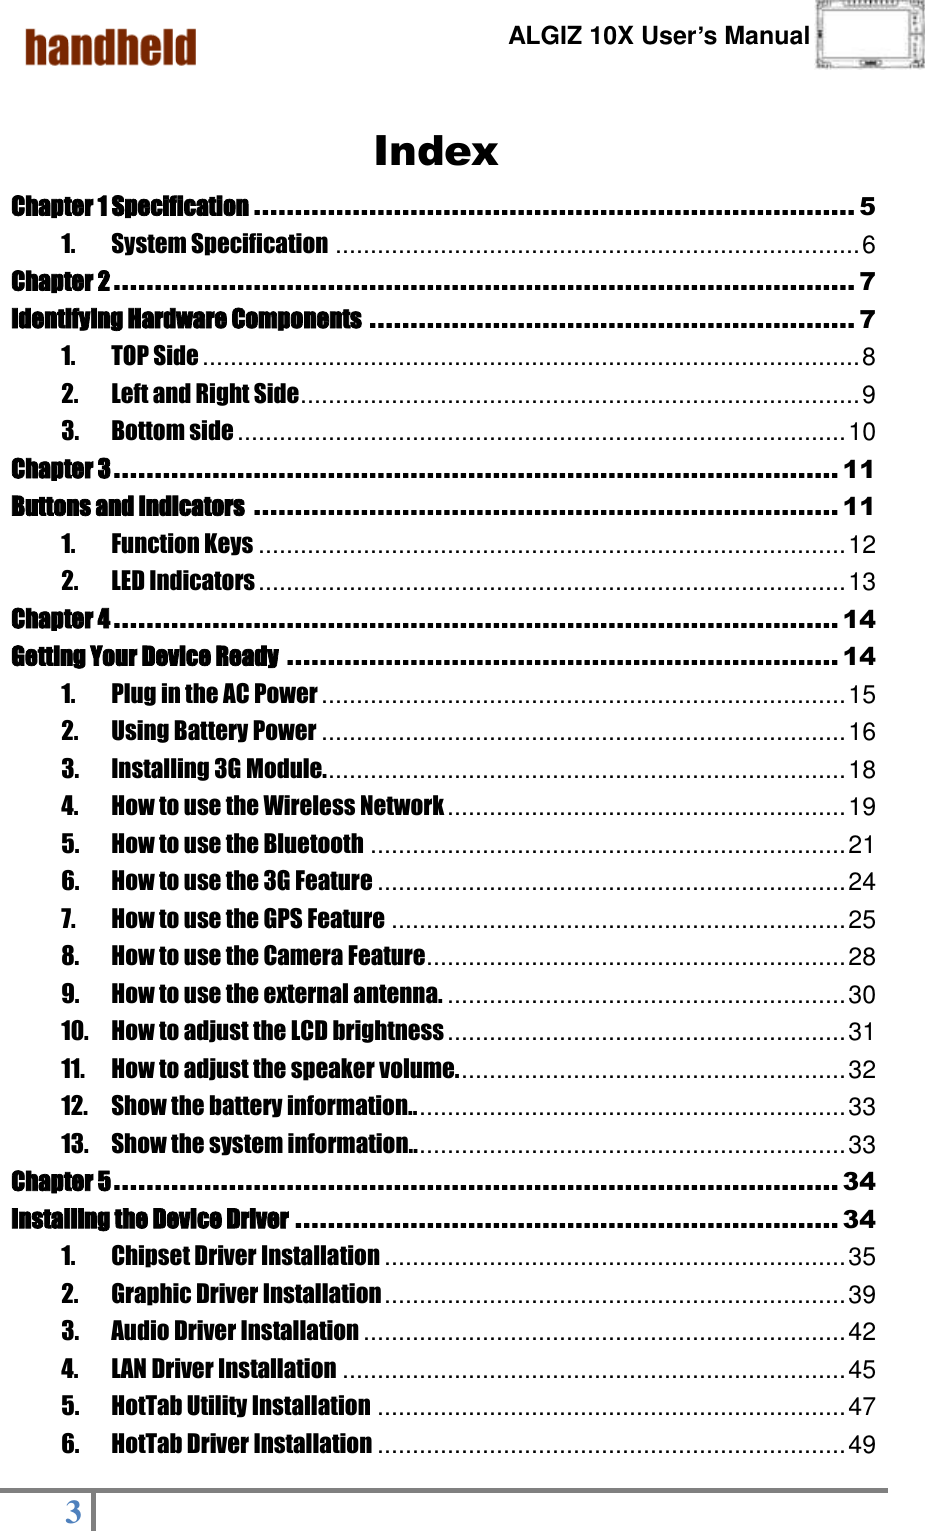      ALGIZ 10X User’s Manual  3    Index Chapter 1 Specification ......................................................................... 5 1. System Specification ........................................................................... 6 Chapter 2 .......................................................................................... 7 Identifying Hardware Components ........................................................... 7 1. TOP Side .............................................................................................. 8 2. Left and Right Side ................................................................................ 9 3. Bottom side ....................................................................................... 10 Chapter 3 ........................................................................................ 11 Buttons and Indicators ....................................................................... 11 1. Function Keys .................................................................................... 12 2. LED Indicators .................................................................................... 13 Chapter 4 ........................................................................................ 14 Getting Your Device Ready ................................................................... 14 1. Plug in the AC Power ........................................................................... 15 2. Using Battery Power ........................................................................... 16 3. Installing 3G Module. .......................................................................... 18 4. How to use the Wireless Network ......................................................... 19 5. How to use the Bluetooth .................................................................... 21 6. How to use the 3G Feature ................................................................... 24 7. How to use the GPS Feature ................................................................. 25 8. How to use the Camera Feature............................................................ 28 9. How to use the external antenna. ......................................................... 30 10. How to adjust the LCD brightness ......................................................... 31 11. How to adjust the speaker volume. ....................................................... 32 12. Show the battery information.. ............................................................. 33 13. Show the system information.. ............................................................. 33 Chapter 5 ........................................................................................ 34 Installing the Device Driver .................................................................. 34 1. Chipset Driver Installation .................................................................. 35 2. Graphic Driver Installation .................................................................. 39 3. Audio Driver Installation ..................................................................... 42 4. LAN Driver Installation ........................................................................ 45 5. HotTab Utility Installation ................................................................... 47 6. HotTab Driver Installation ................................................................... 49 